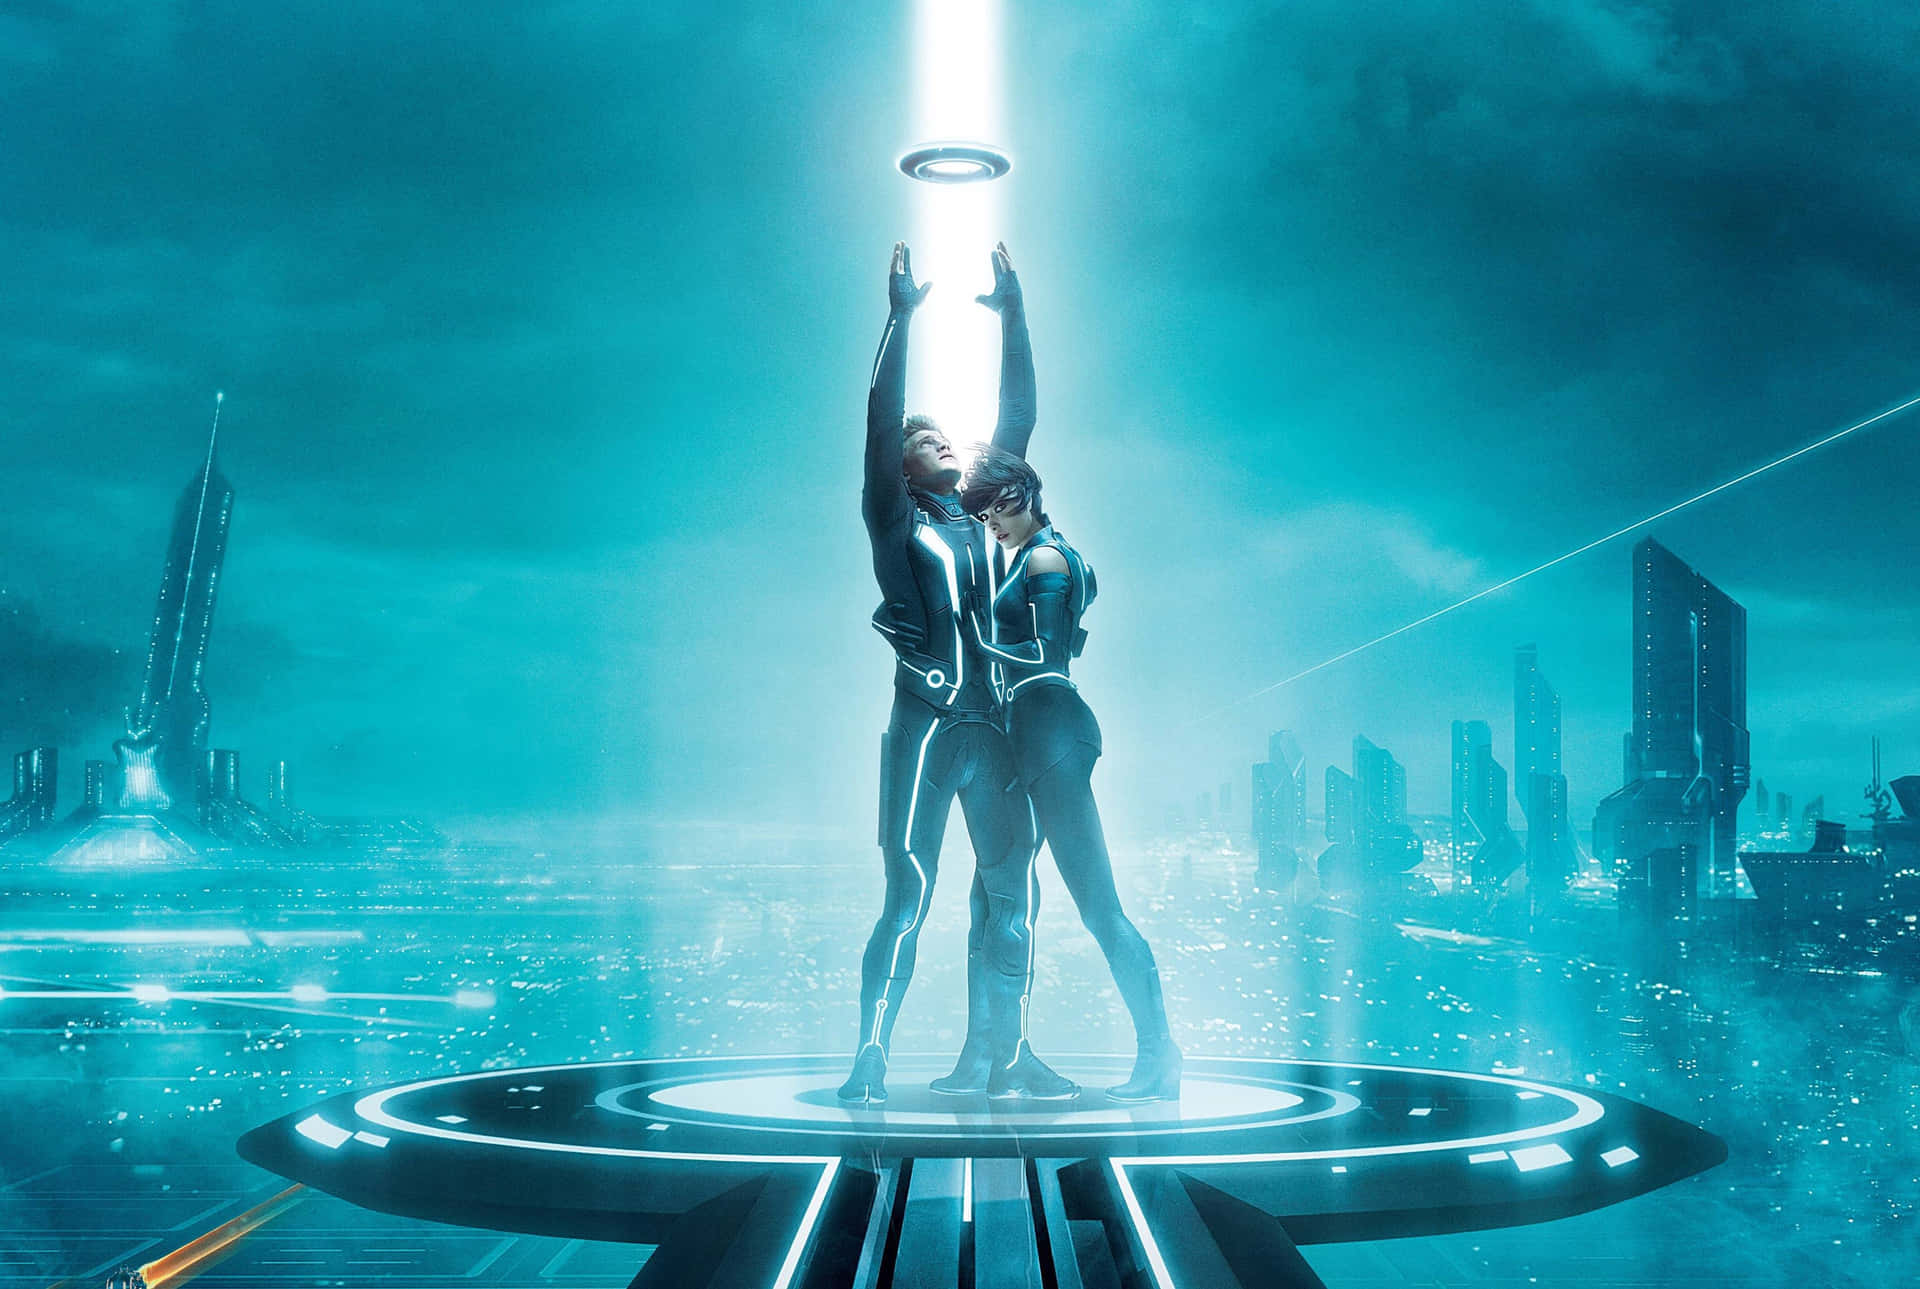 “Experience the Thrills of the Tron 4k Universe” Wallpaper